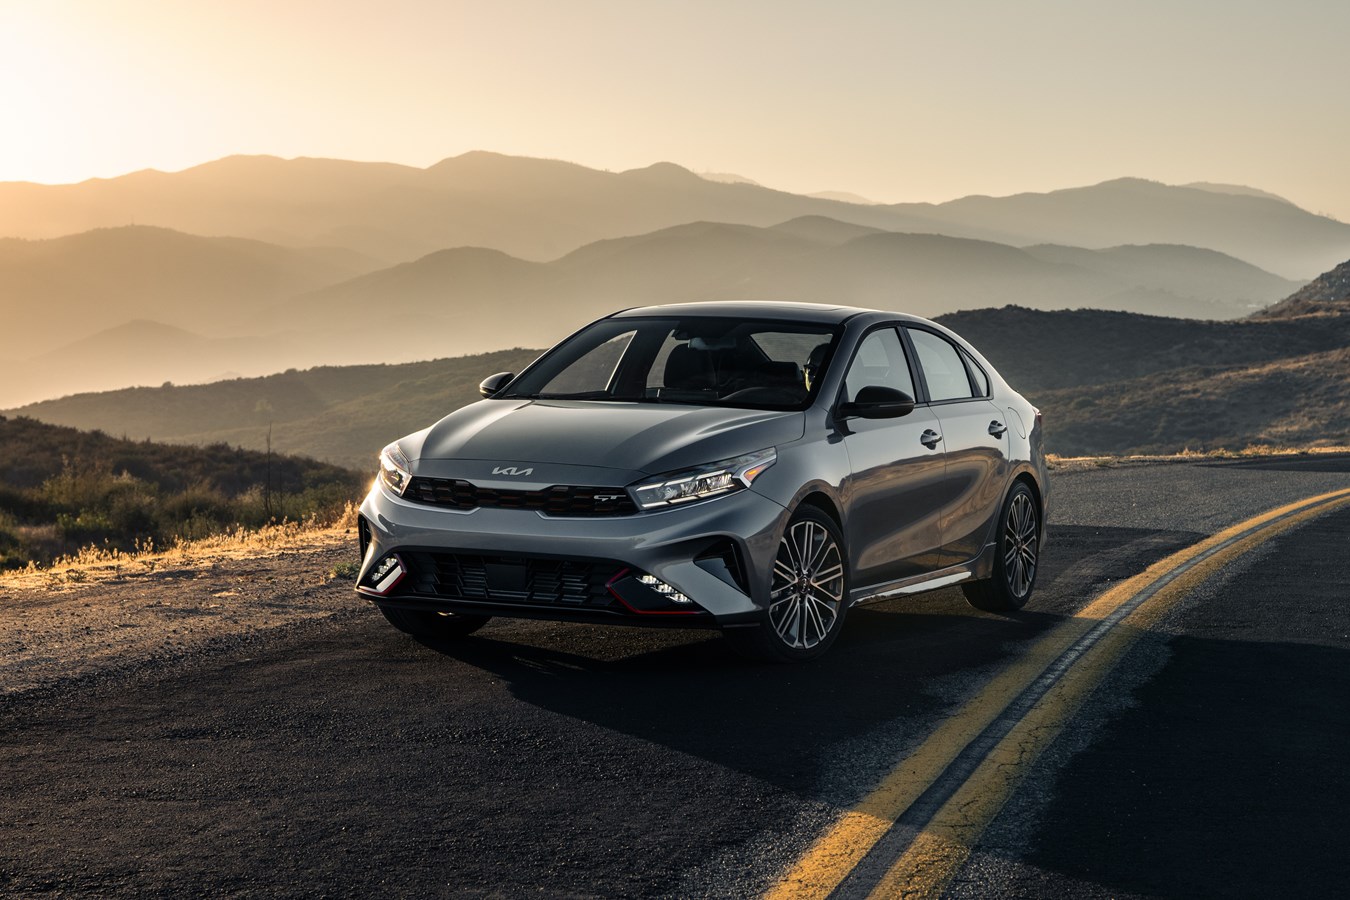 2022 Kia Forte Offers Revised Styling and More Features